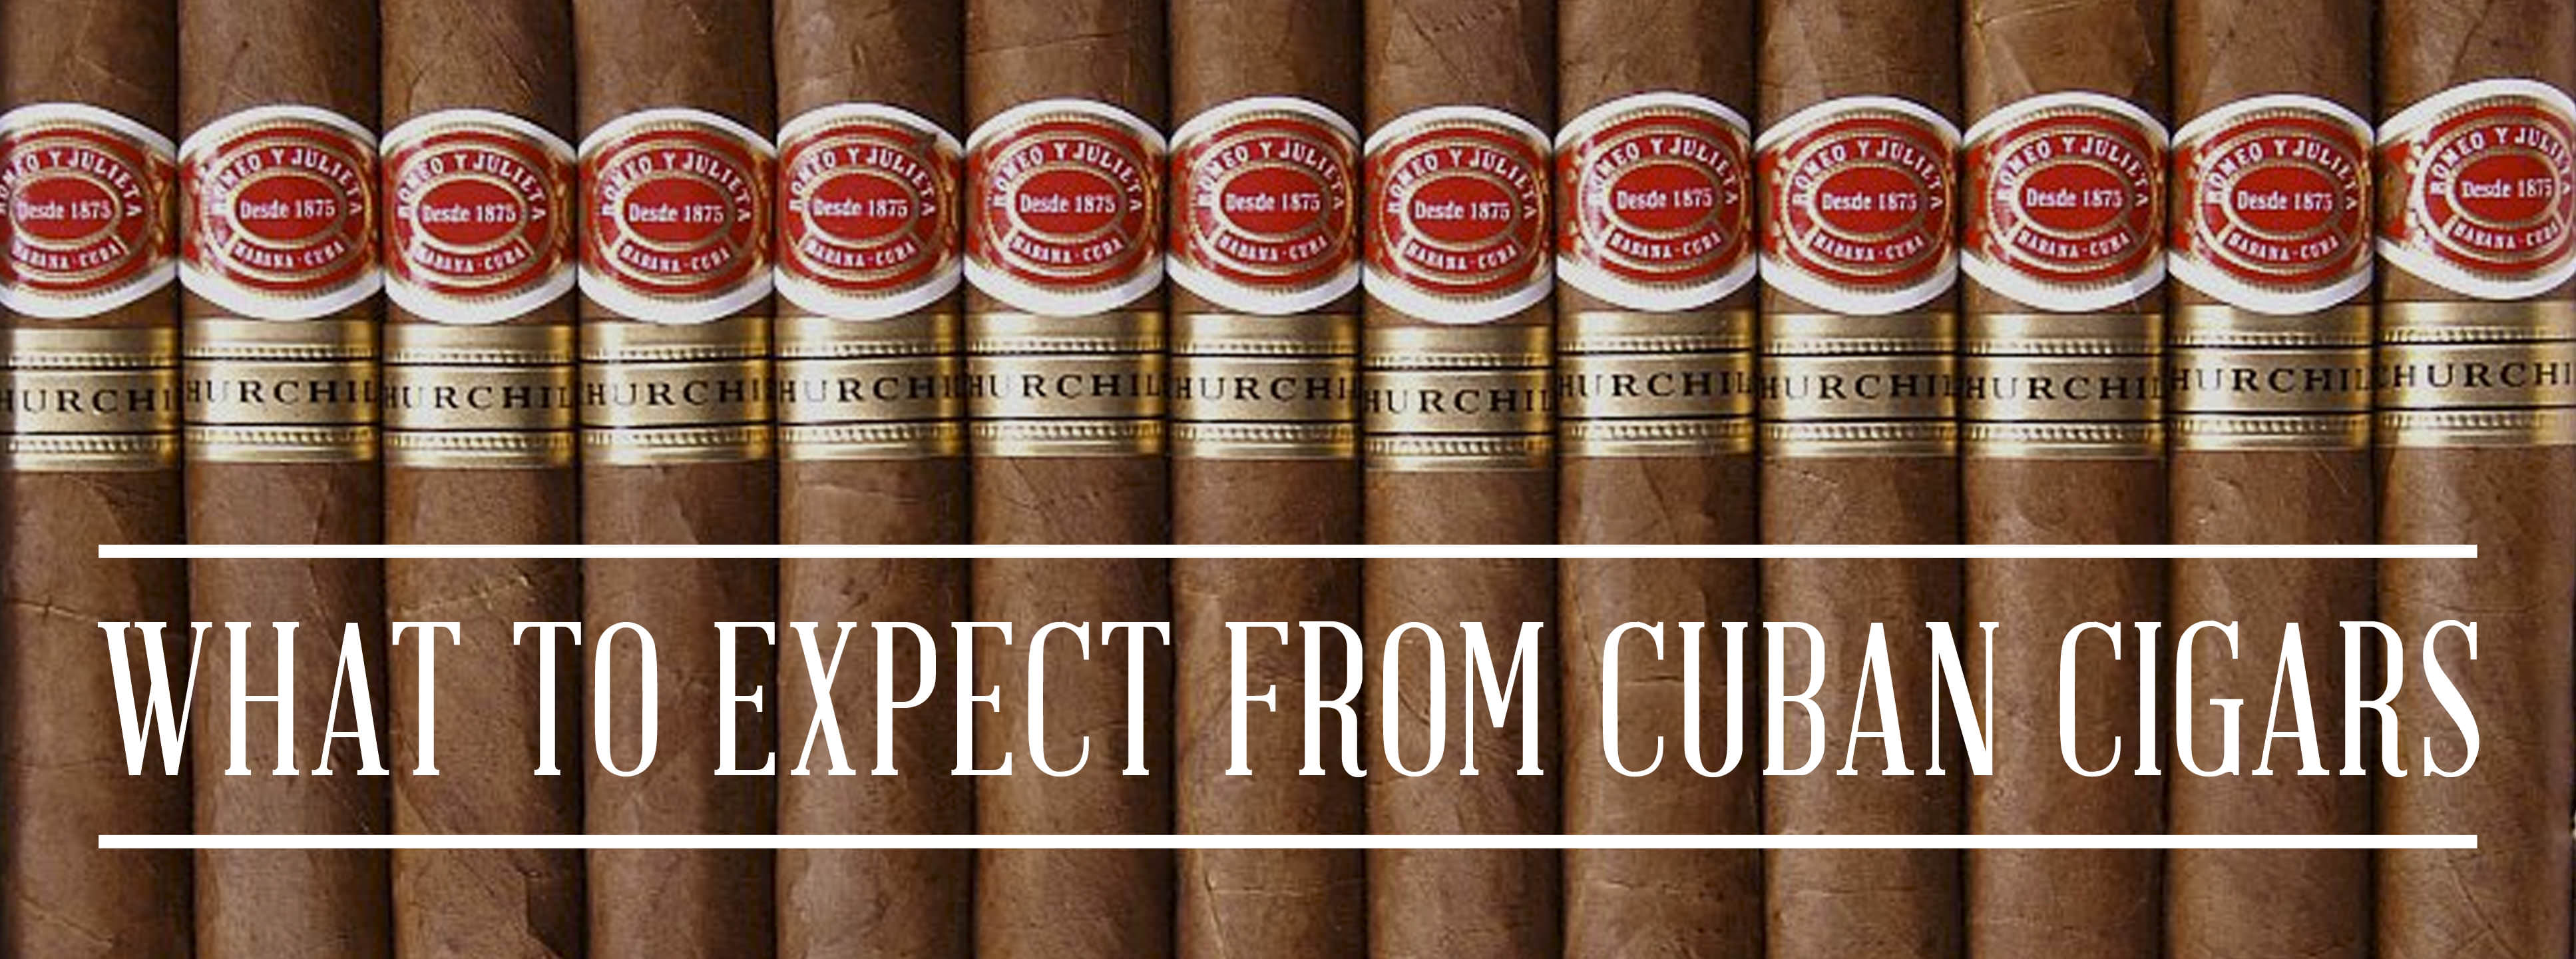 What To Expect From Cuban Cigars Gentleman S Gazette